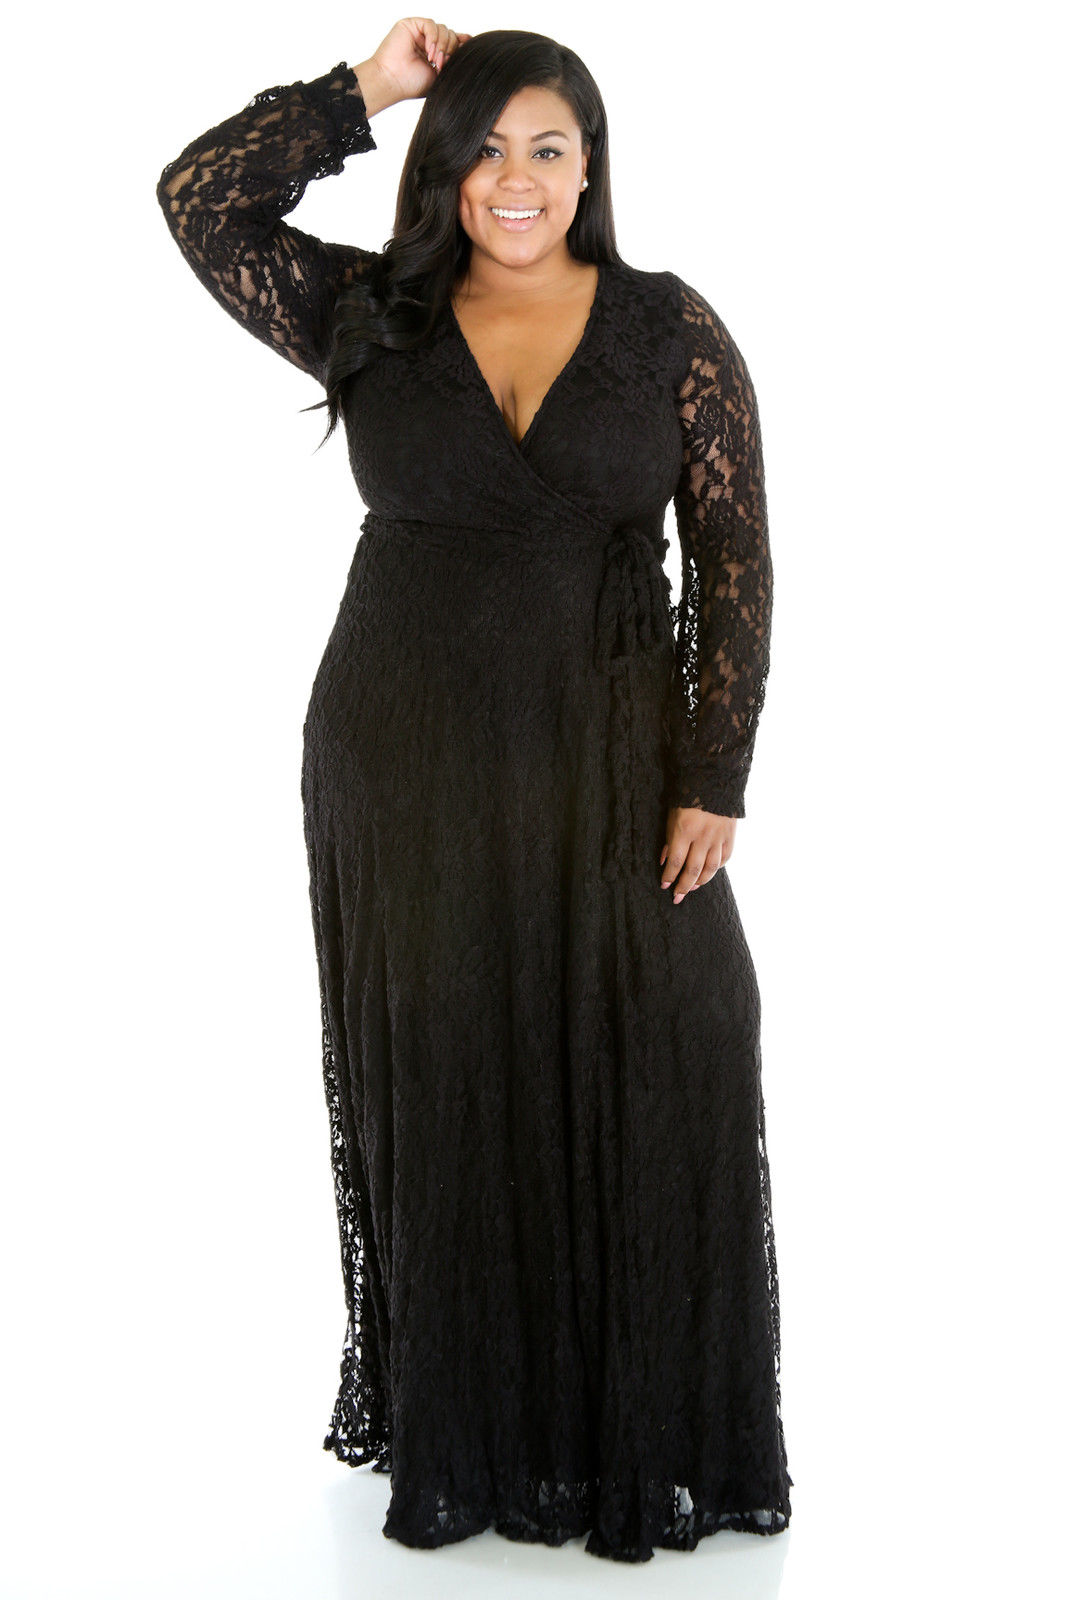 Lace Takeover Maxi Dress Party Hot Dressy Popular Fashion